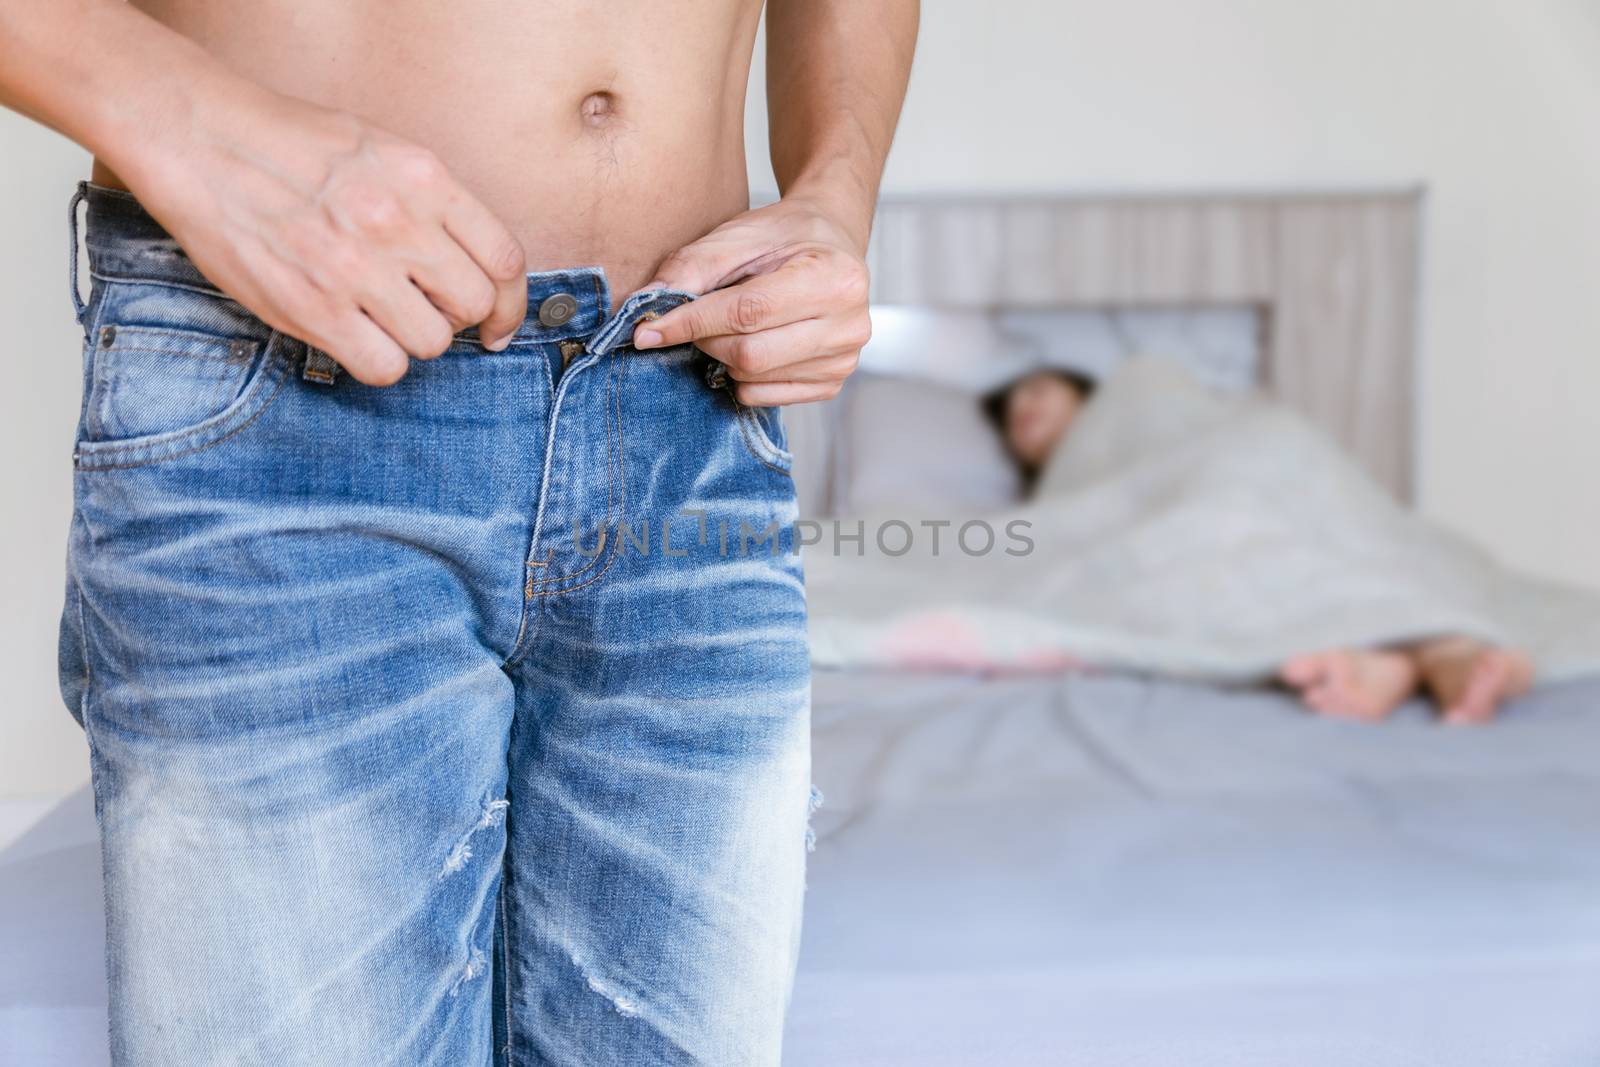 Men are taking off their pants to have of couple in bedroom is having sex. by sompongtom